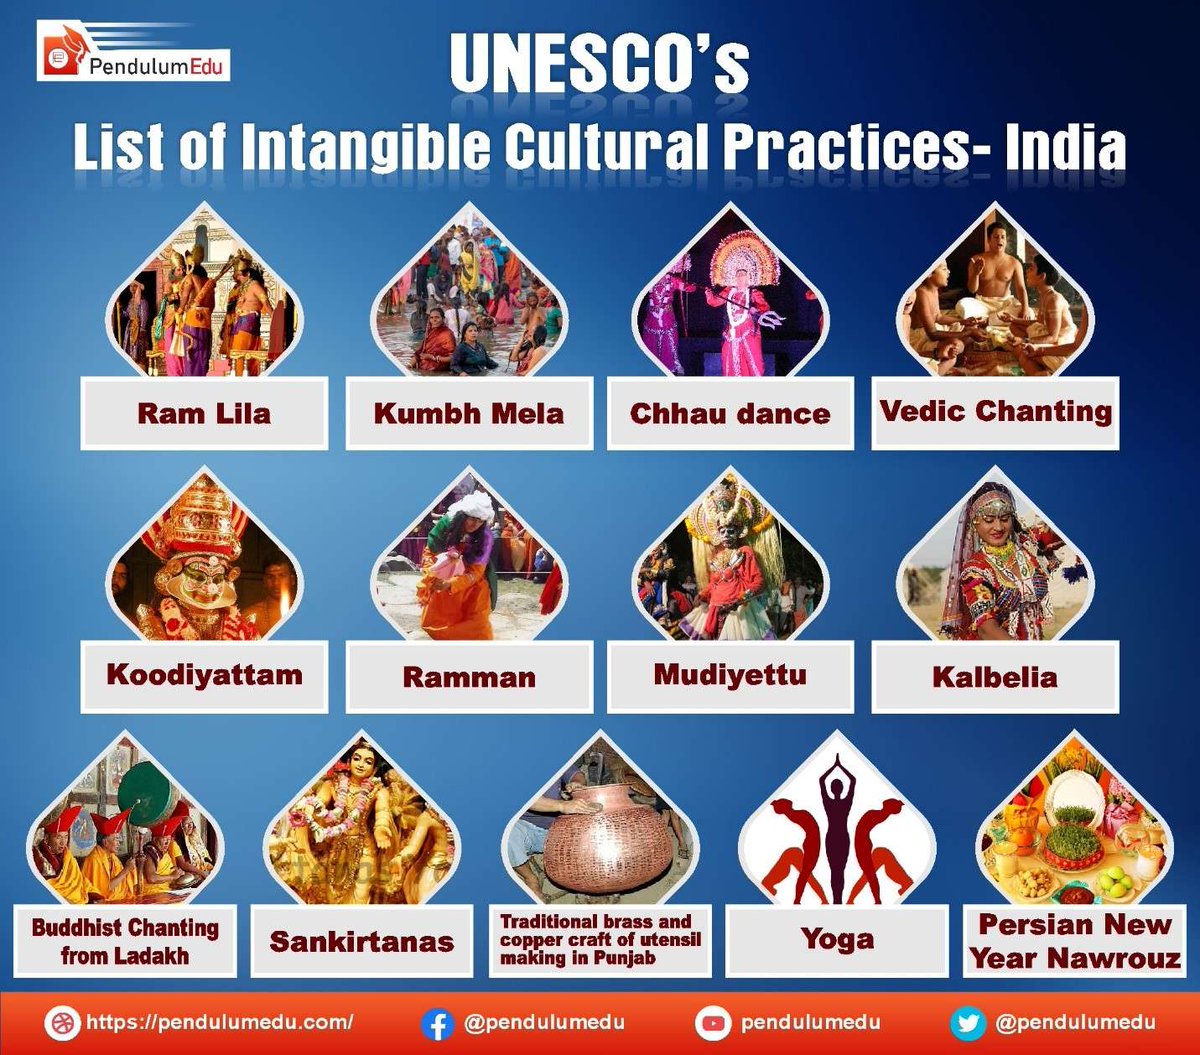 UNESCO's List of Intangible Cultural Practices- India. 

(Data courtesy: #PendulumEdu)